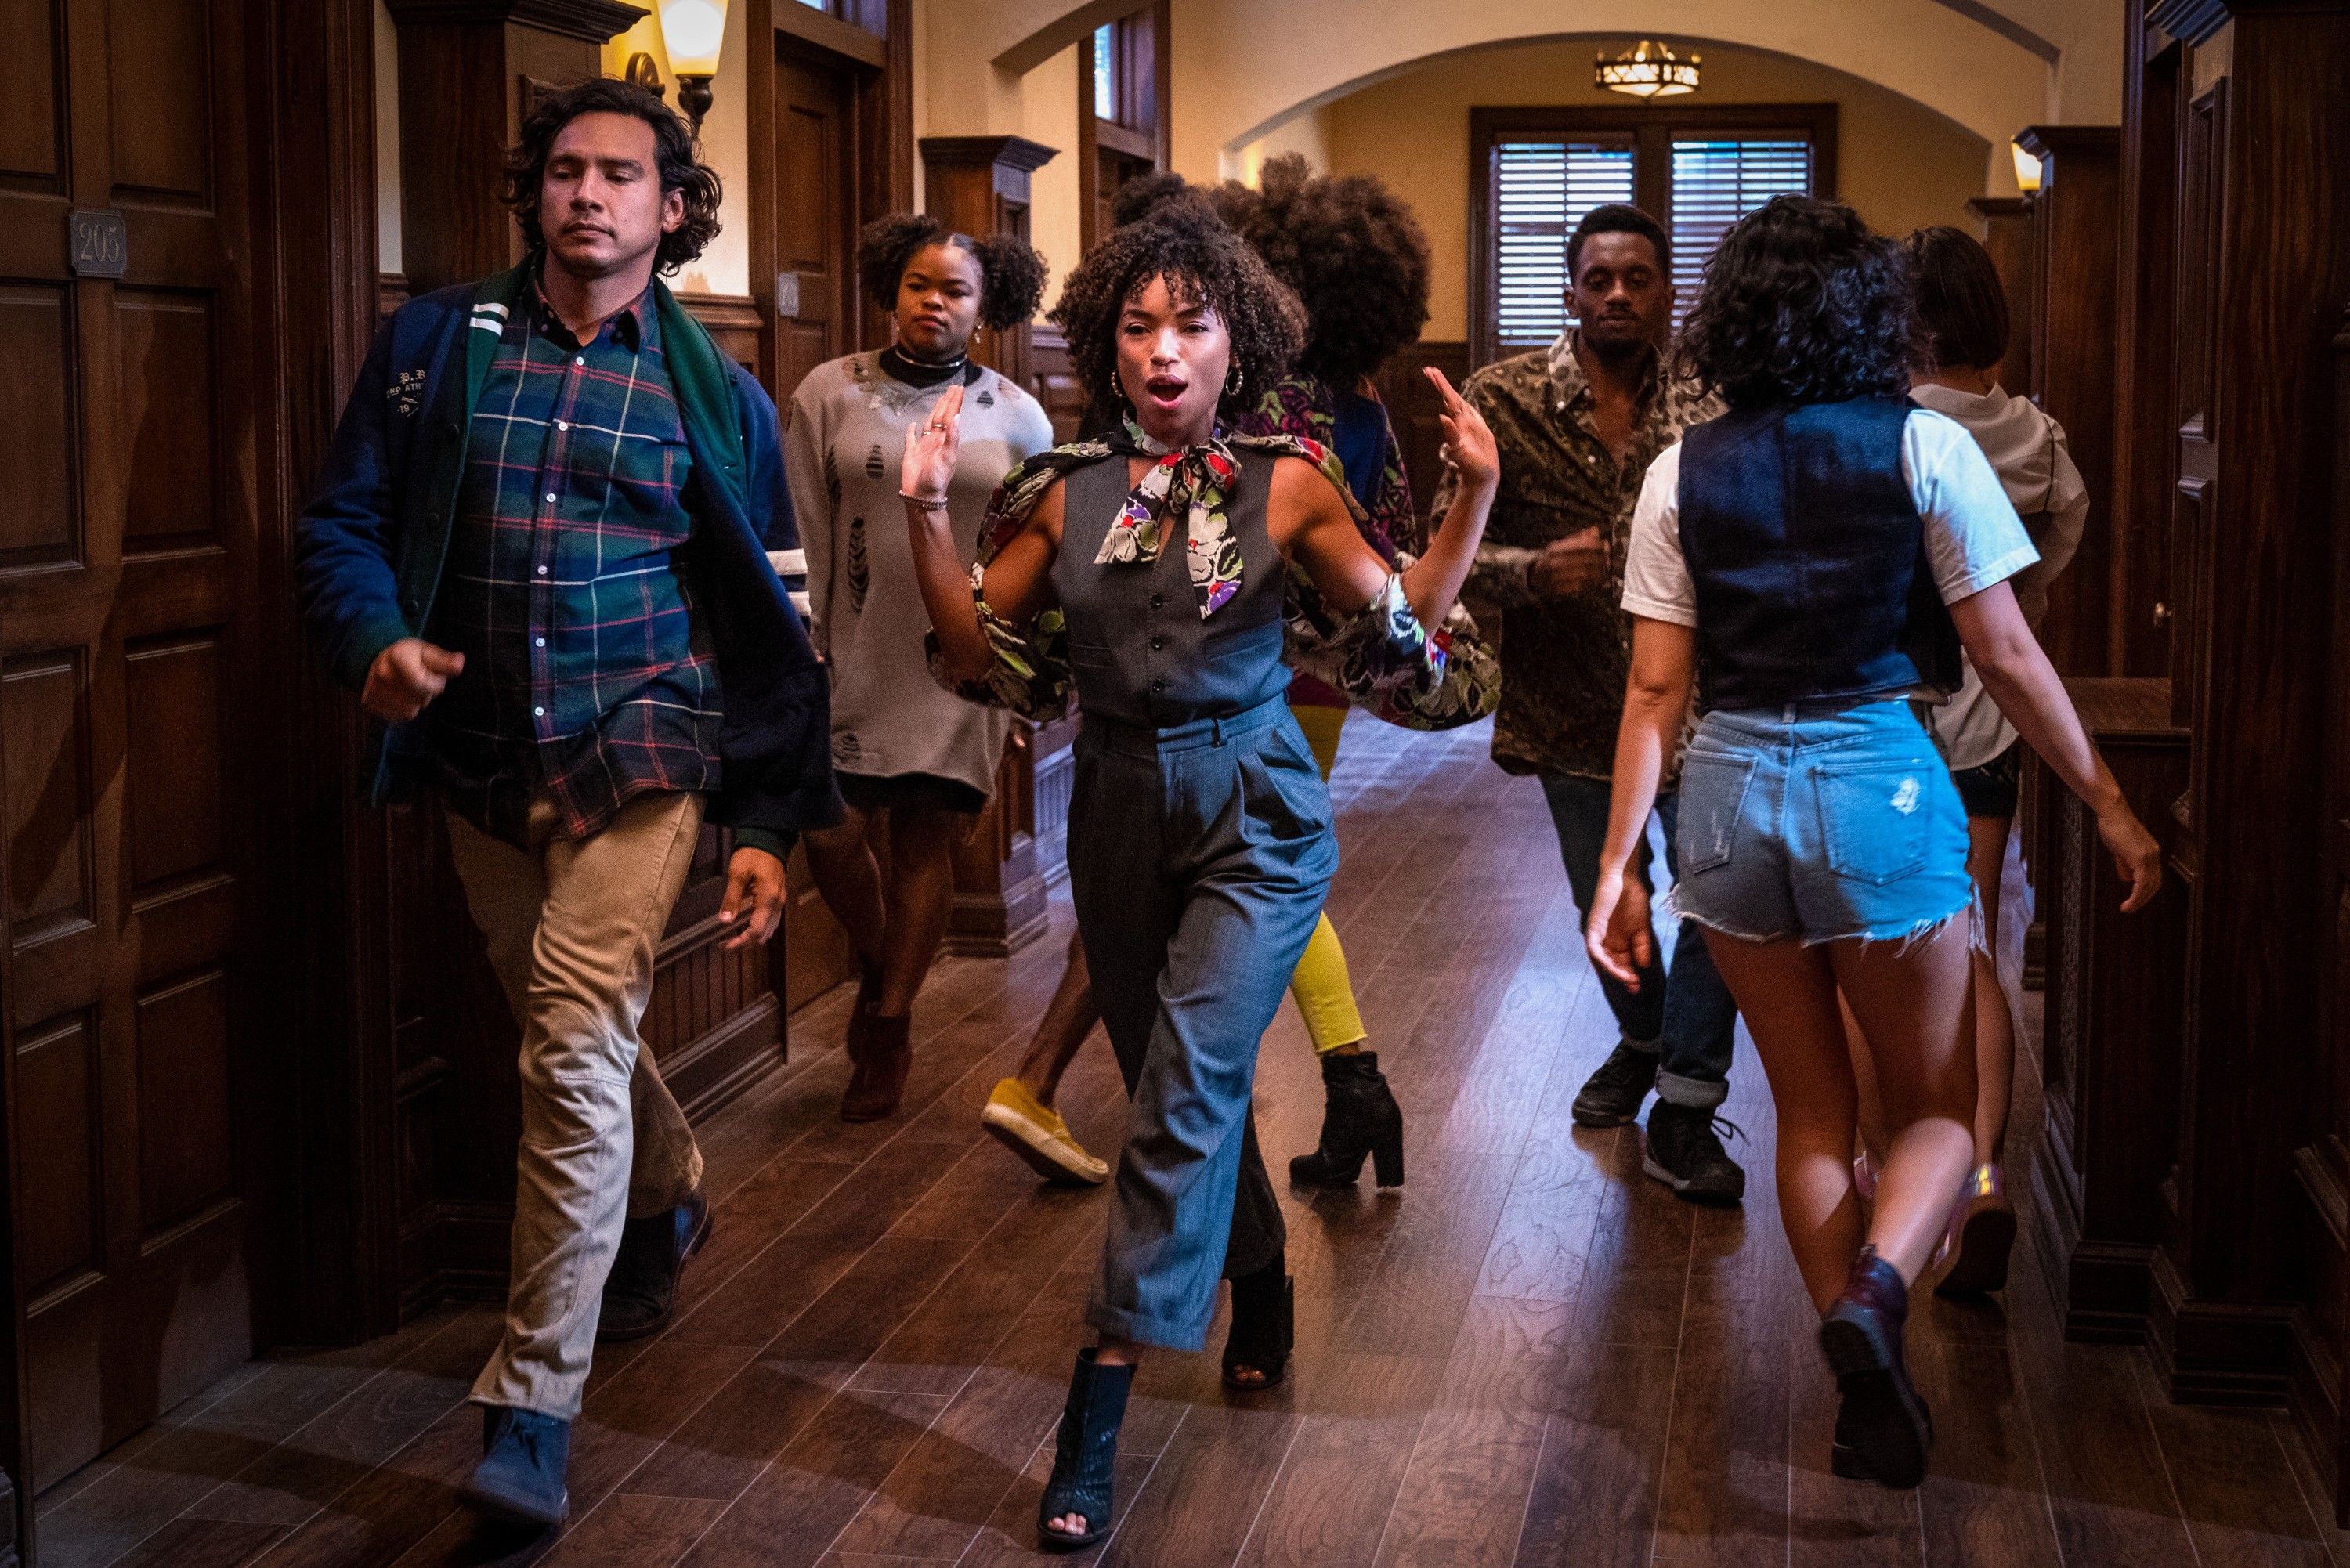 Dear White People transforming into '90s musical for final season